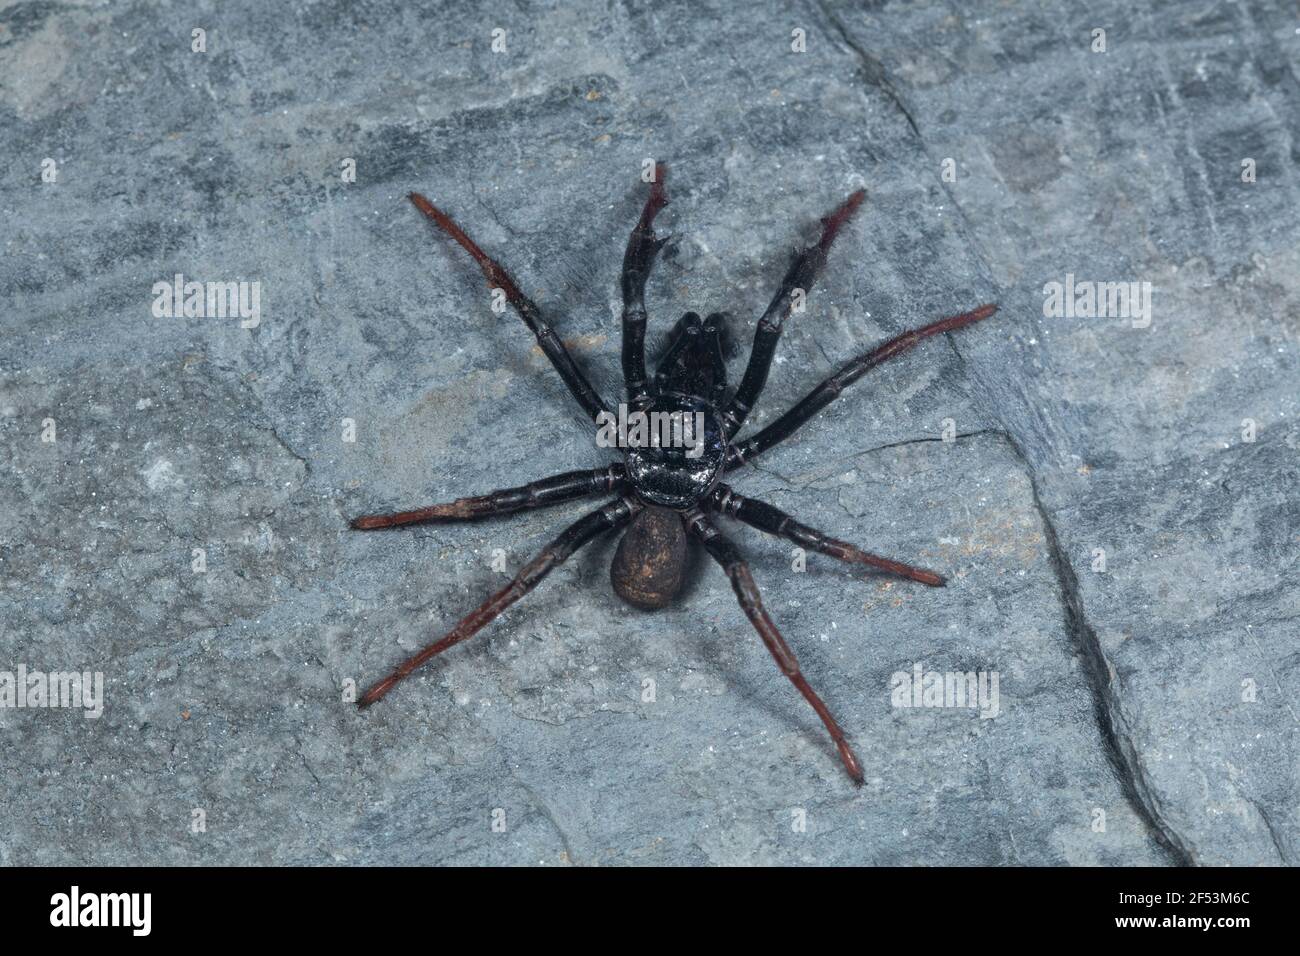 Trapdoor spider male of the genus Idiops. These spiders make a trap-door to their burrow entrance. Stock Photo